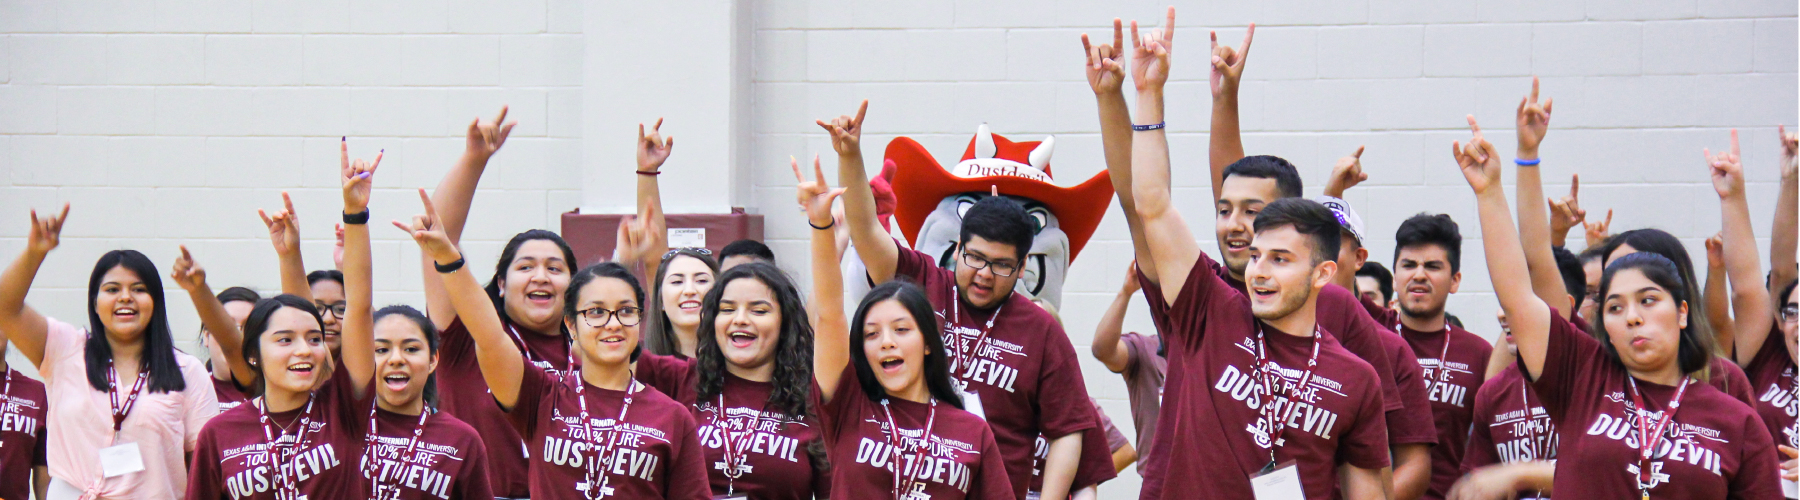 Freshman TAMIU students during Dusty Camp 2019